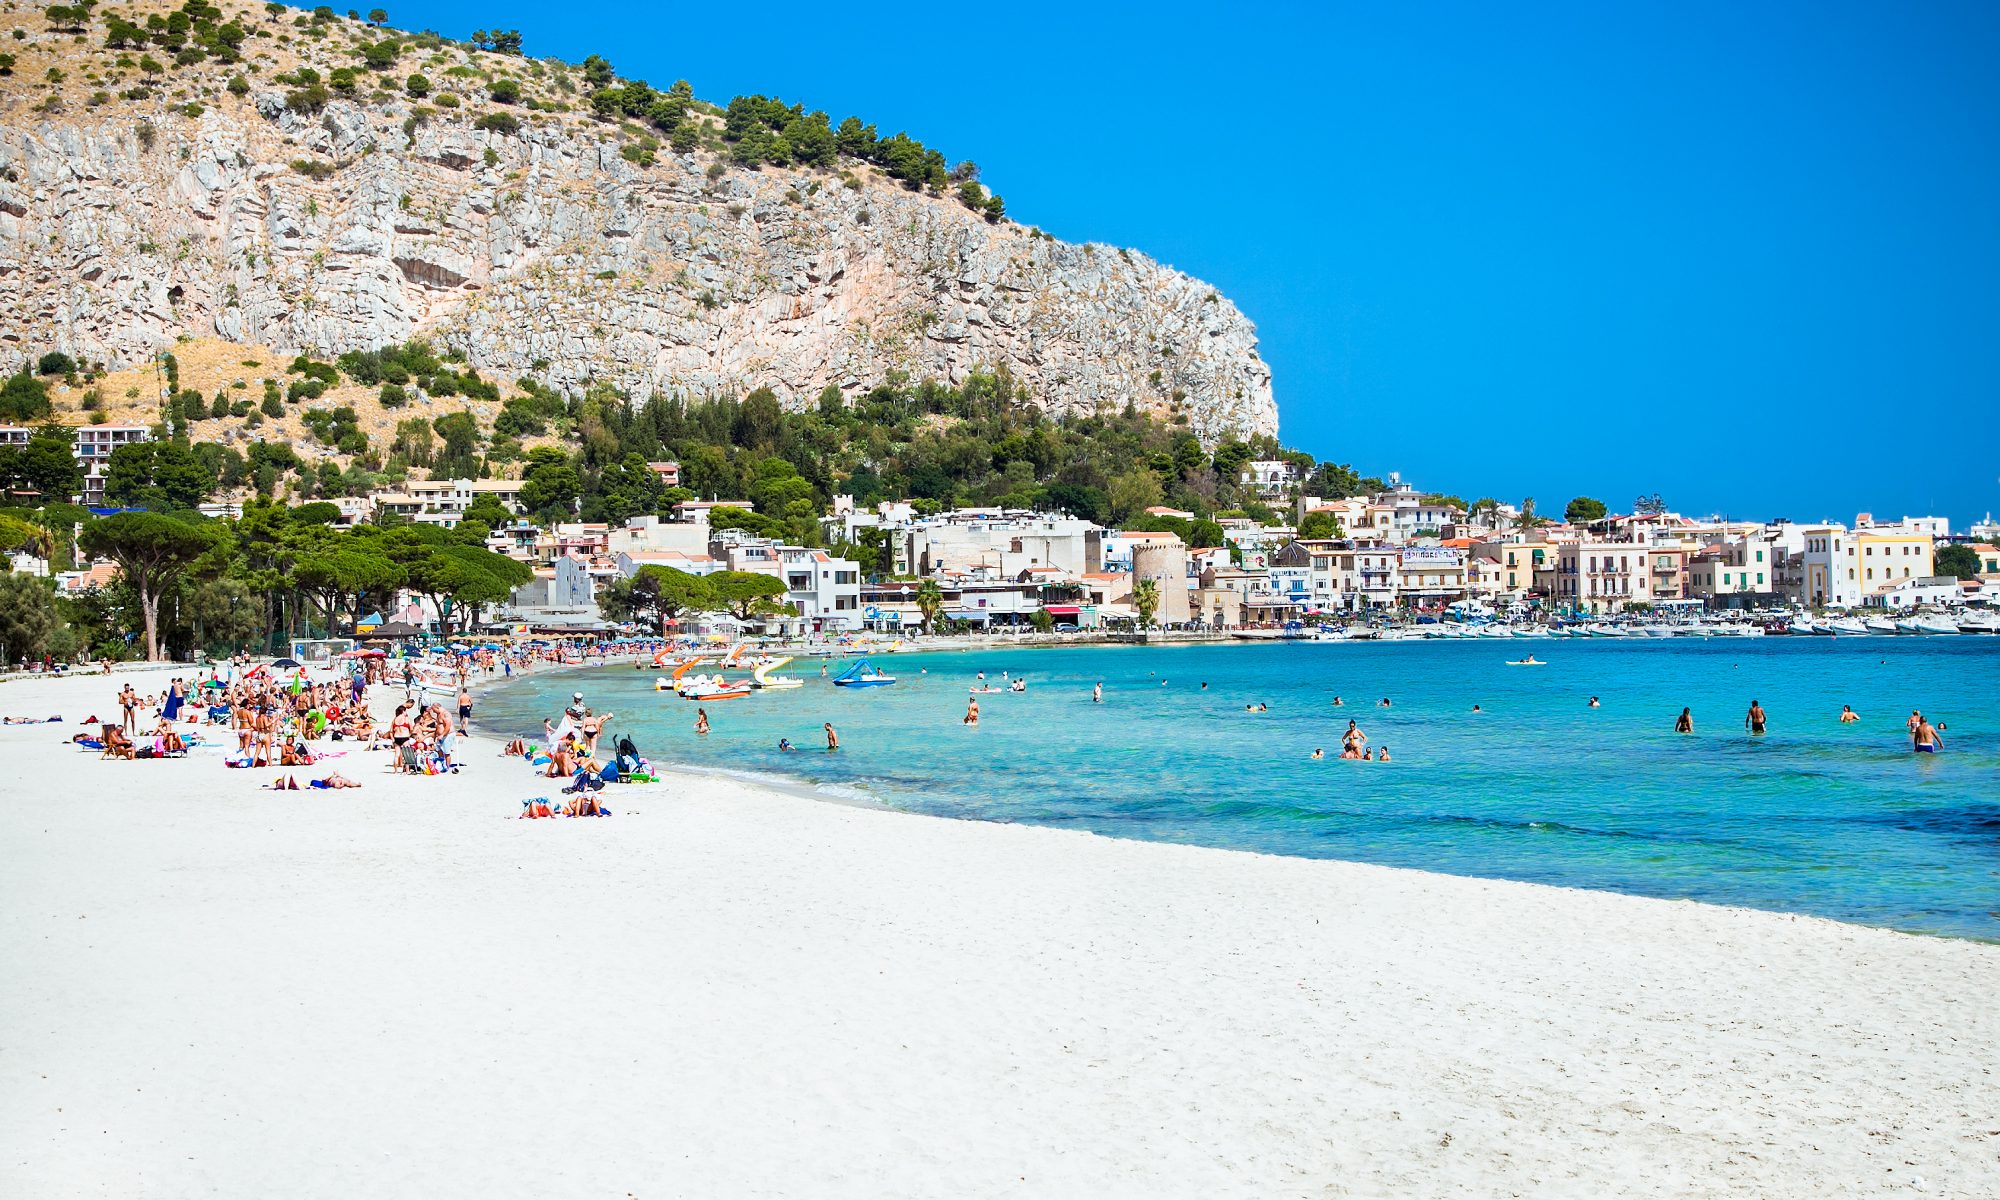 View of Mondello Beach, which you can visit on the itinerary described in the blog article.